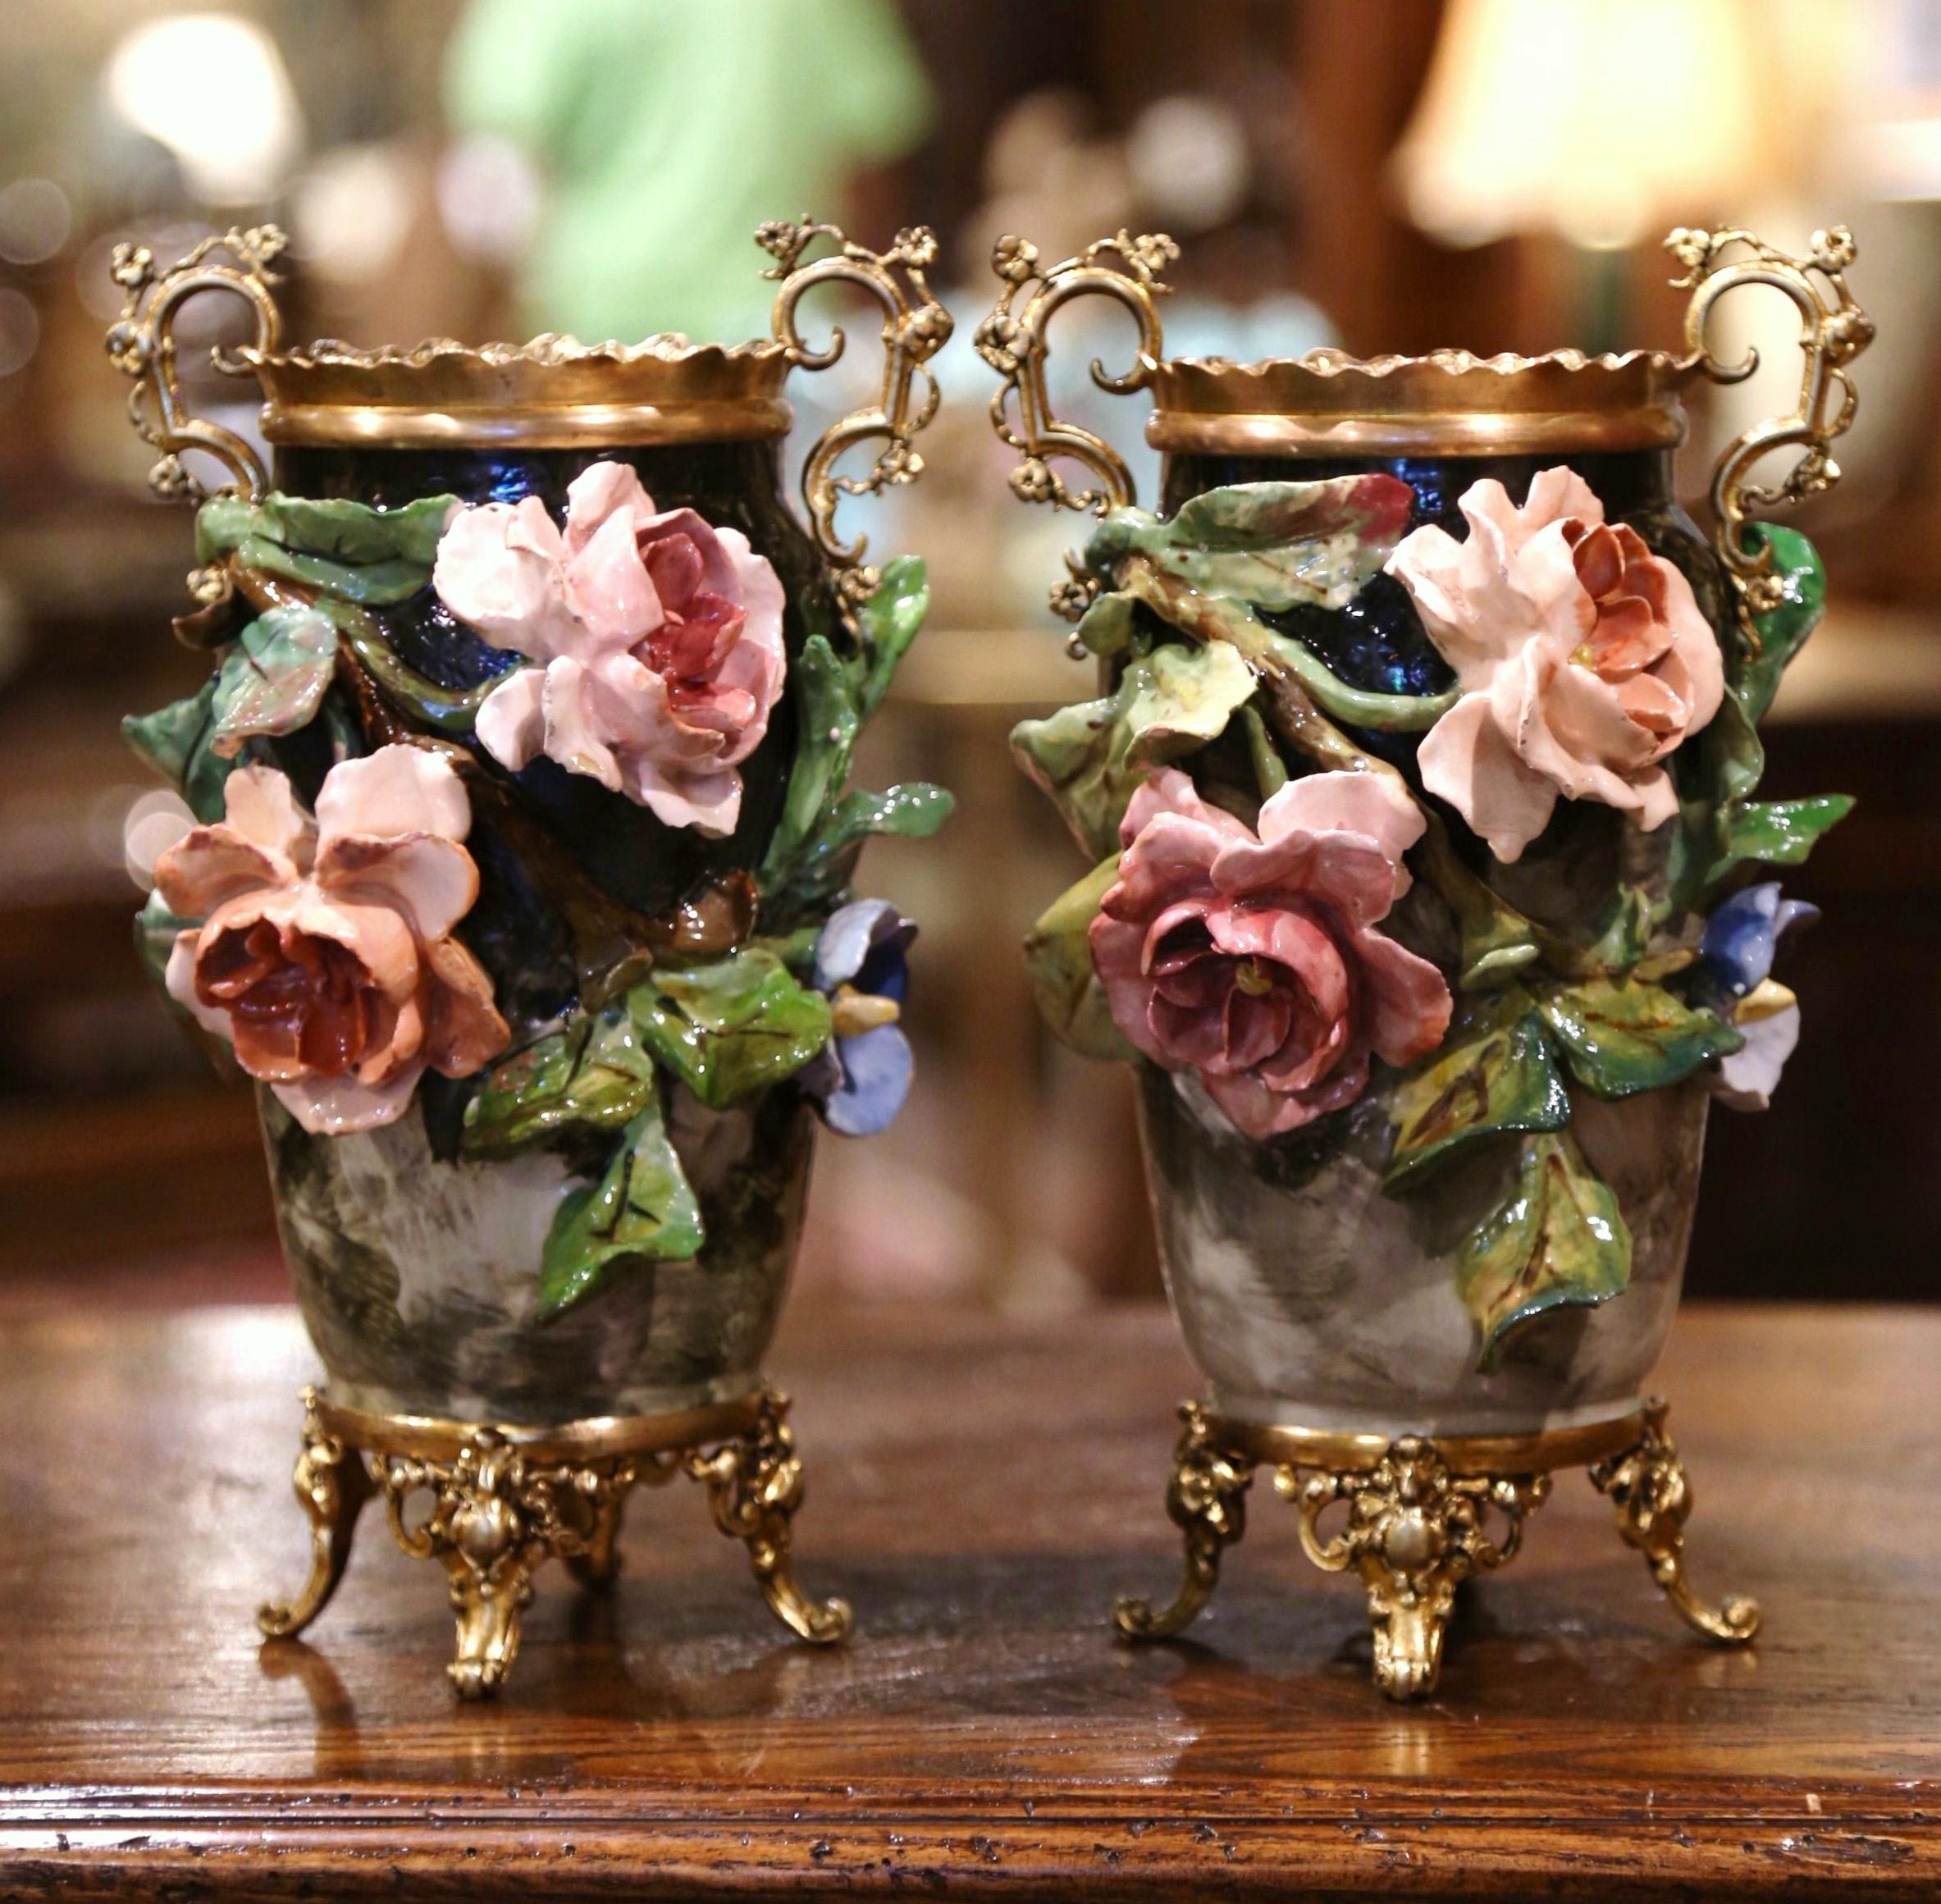 Bronze Pair of 19th Century French Faience and Brass Barbotine Vases with Floral Decor